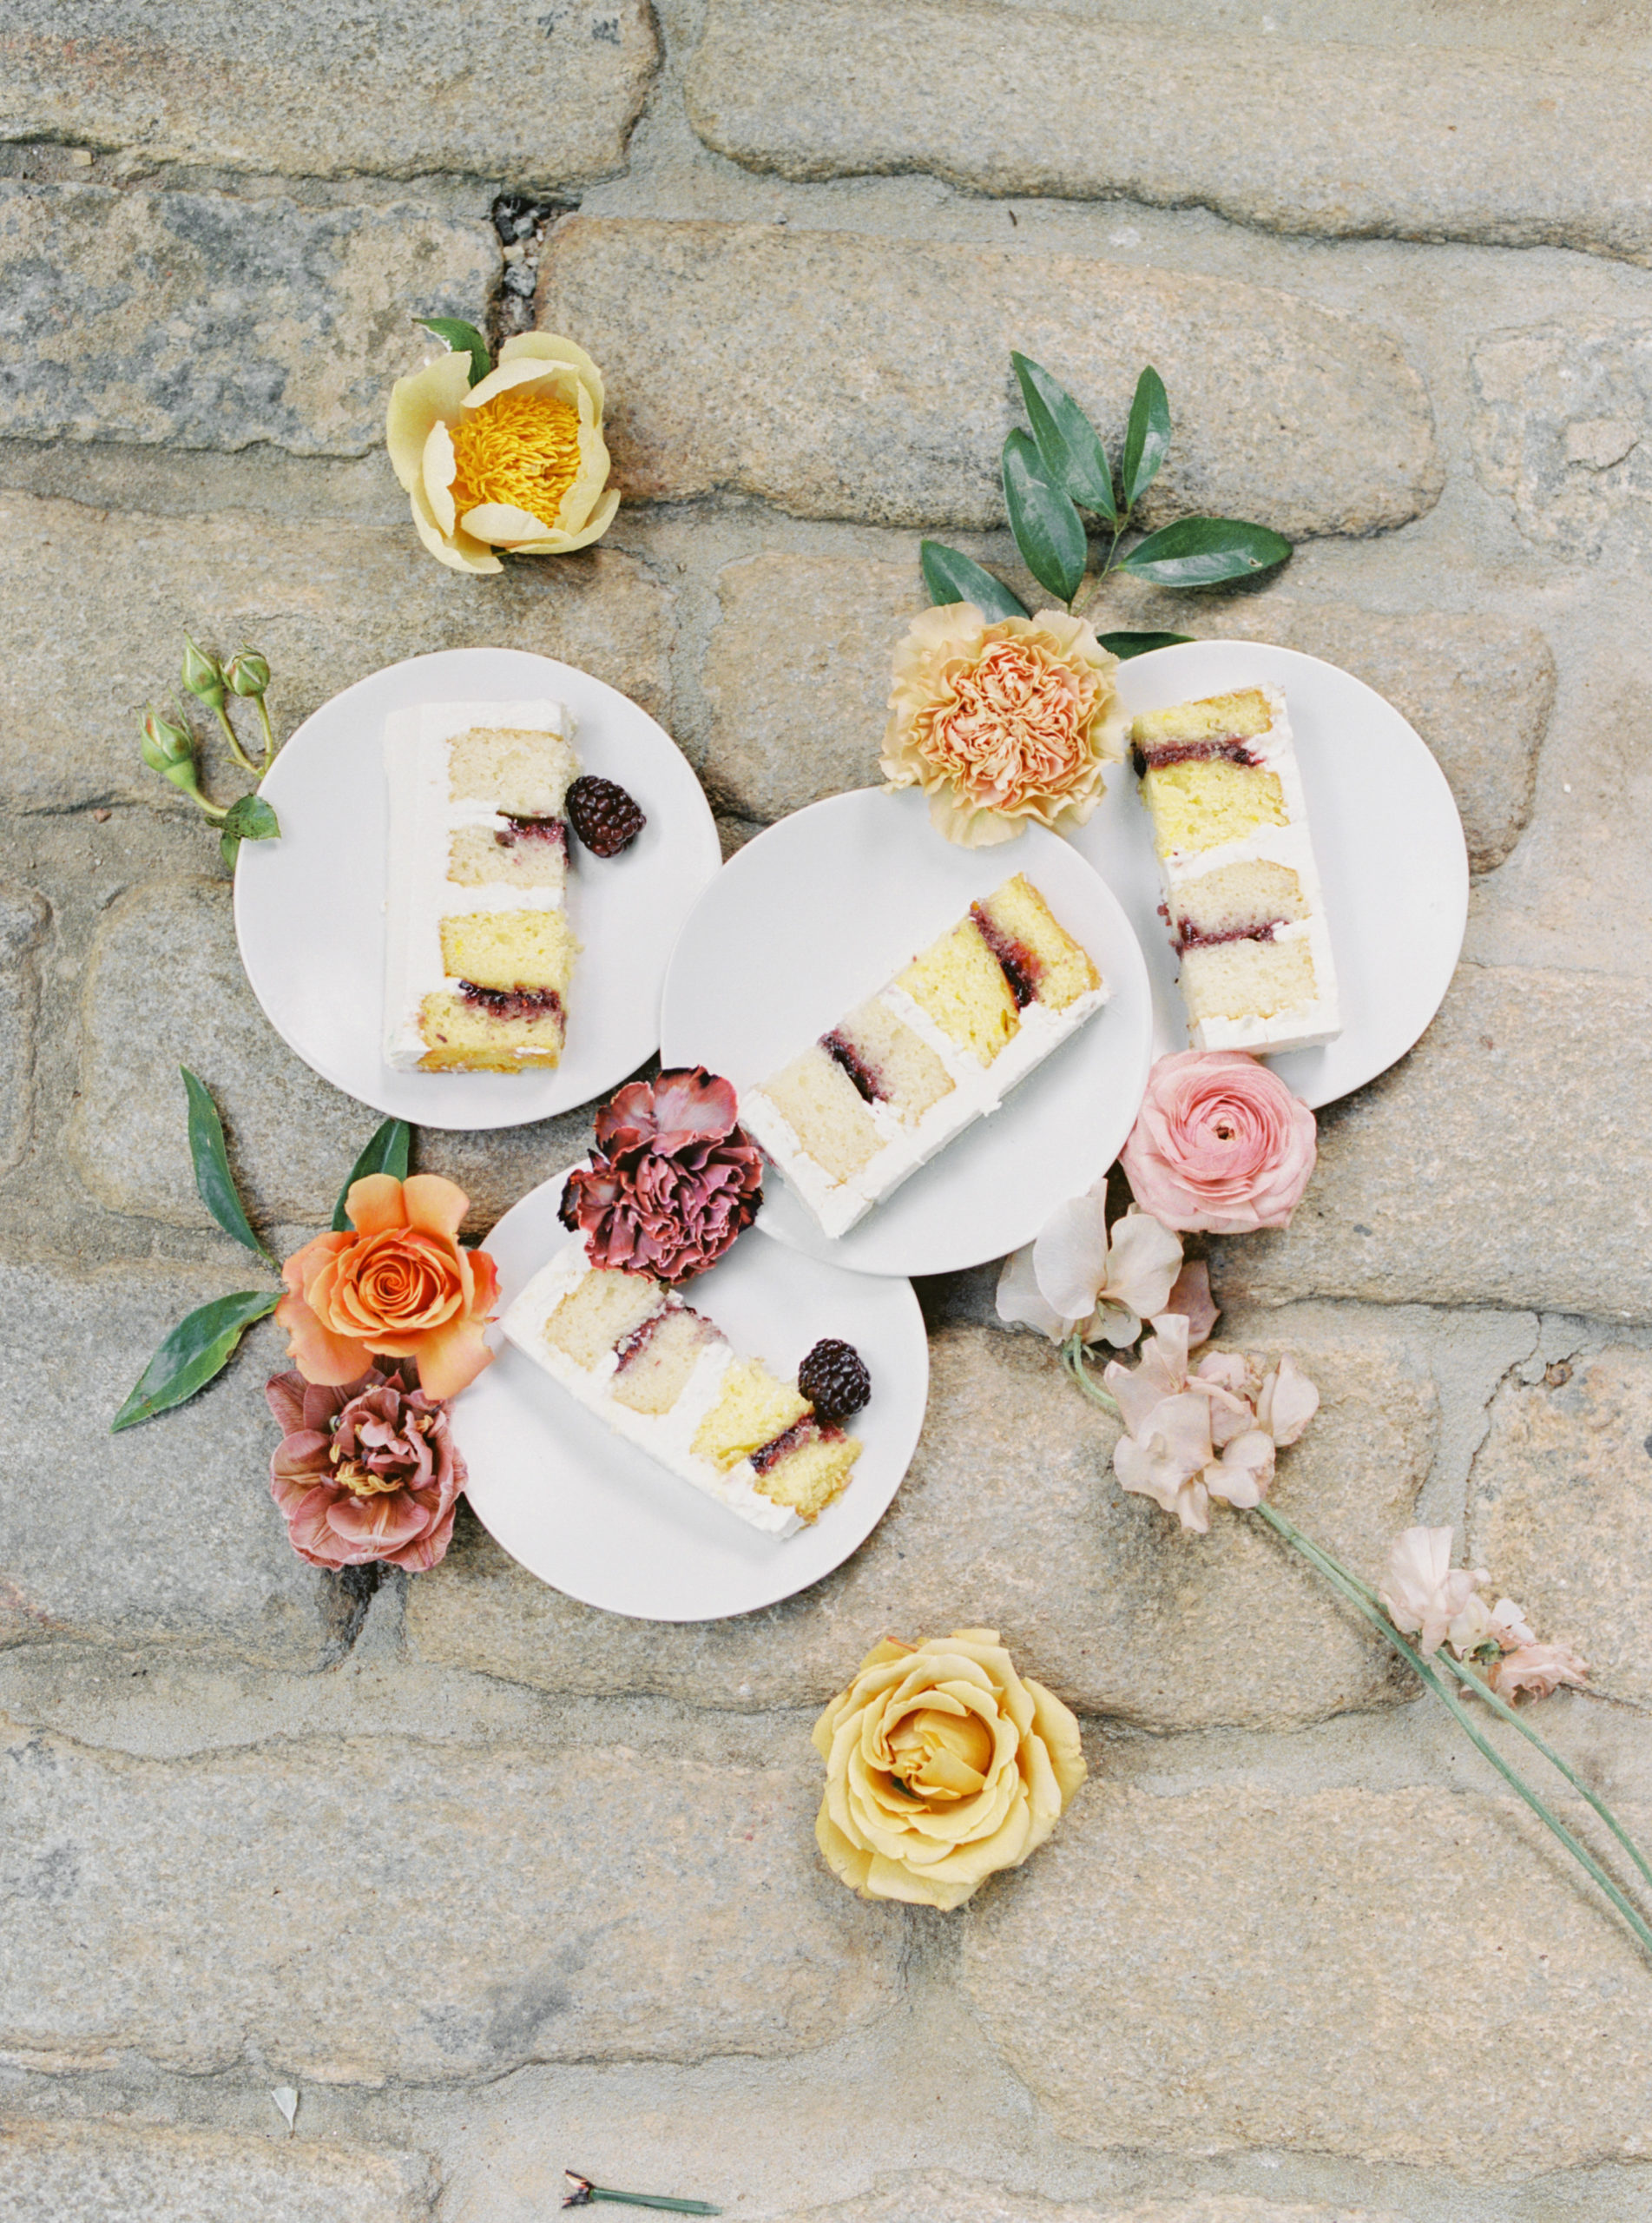 Slices of cake on white circular plates surrounded by flower stems on cobblestone